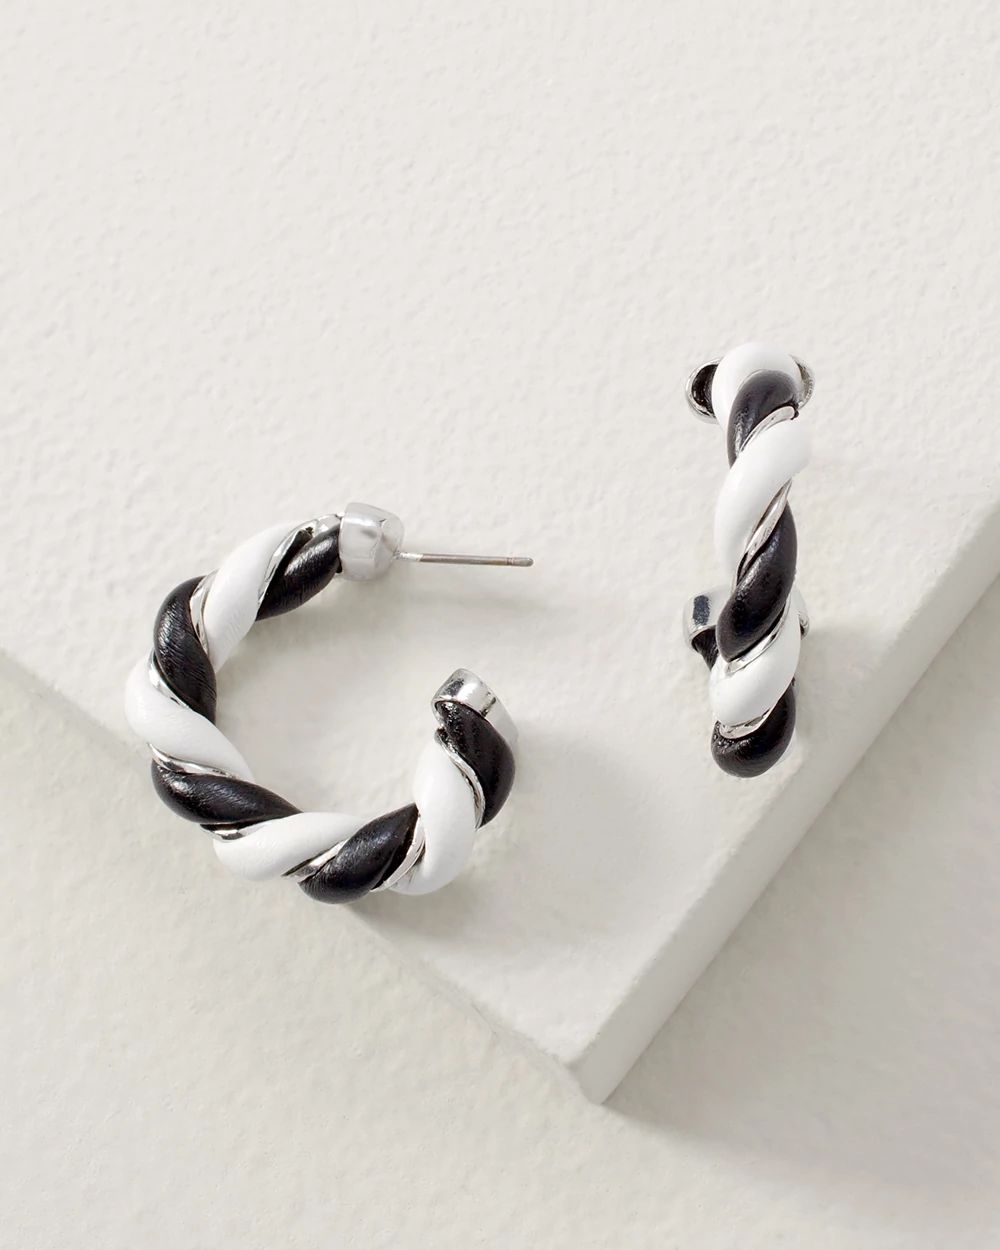 White & Black Vegan Leather Twisted Hoops click to view larger image.